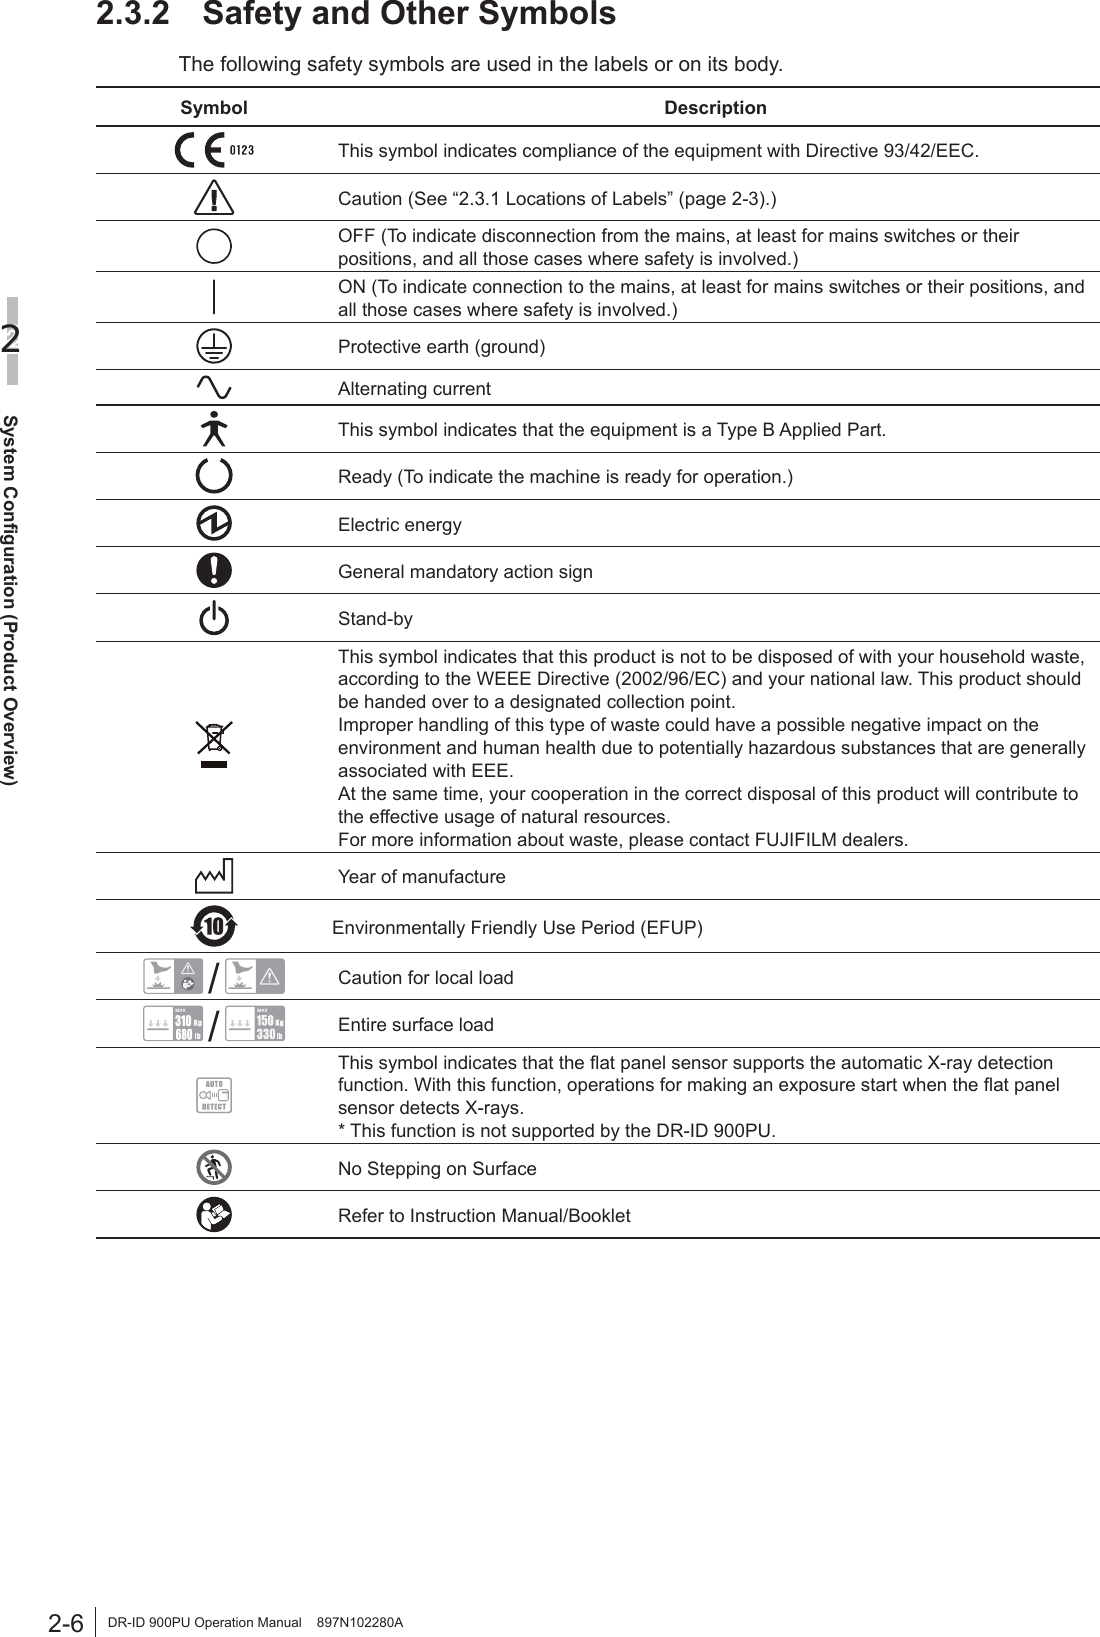 2-6System Configuration (Product Overview)2DR-ID 900PU Operation Manual    897N102280A2.3.2  Safety and Other SymbolsThe following safety symbols are used in the labels or on its body.Symbol DescriptionThis symbol indicates compliance of the equipment with Directive 93/42/EEC. Caution (See “2.3.1 Locations of Labels” (page 2-3).)OFF (To indicate disconnection from the mains, at least for mains switches or their positions, and all those cases where safety is involved.) ON (To indicate connection to the mains, at least for mains switches or their positions, and all those cases where safety is involved.) Protective earth (ground)Alternating current This symbol indicates that the equipment is a Type B Applied Part.Ready (To indicate the machine is ready for operation.)Electric energyGeneral mandatory action signStand-byThis symbol indicates that this product is not to be disposed of with your household waste, according to the WEEE Directive (2002/96/EC) and your national law. This product should be handed over to a designated collection point.Improper handling of this type of waste could have a possible negative impact on the environment and human health due to potentially hazardous substances that are generally associated with EEE.At the same time, your cooperation in the correct disposal of this product will contribute to the effective usage of natural resources.For more information about waste, please contact FUJIFILM dealers.Year of manufactureEnvironmentally Friendly Use Period (EFUP) / Caution for local load / Entire surface load This symbol indicates that the ﬂat panel sensor supports the automatic X-ray detection function. With this function, operations for making an exposure start when the ﬂat panel sensor detects X-rays. * This function is not supported by the DR-ID 900PU.No Stepping on SurfaceRefer to Instruction Manual/Booklet